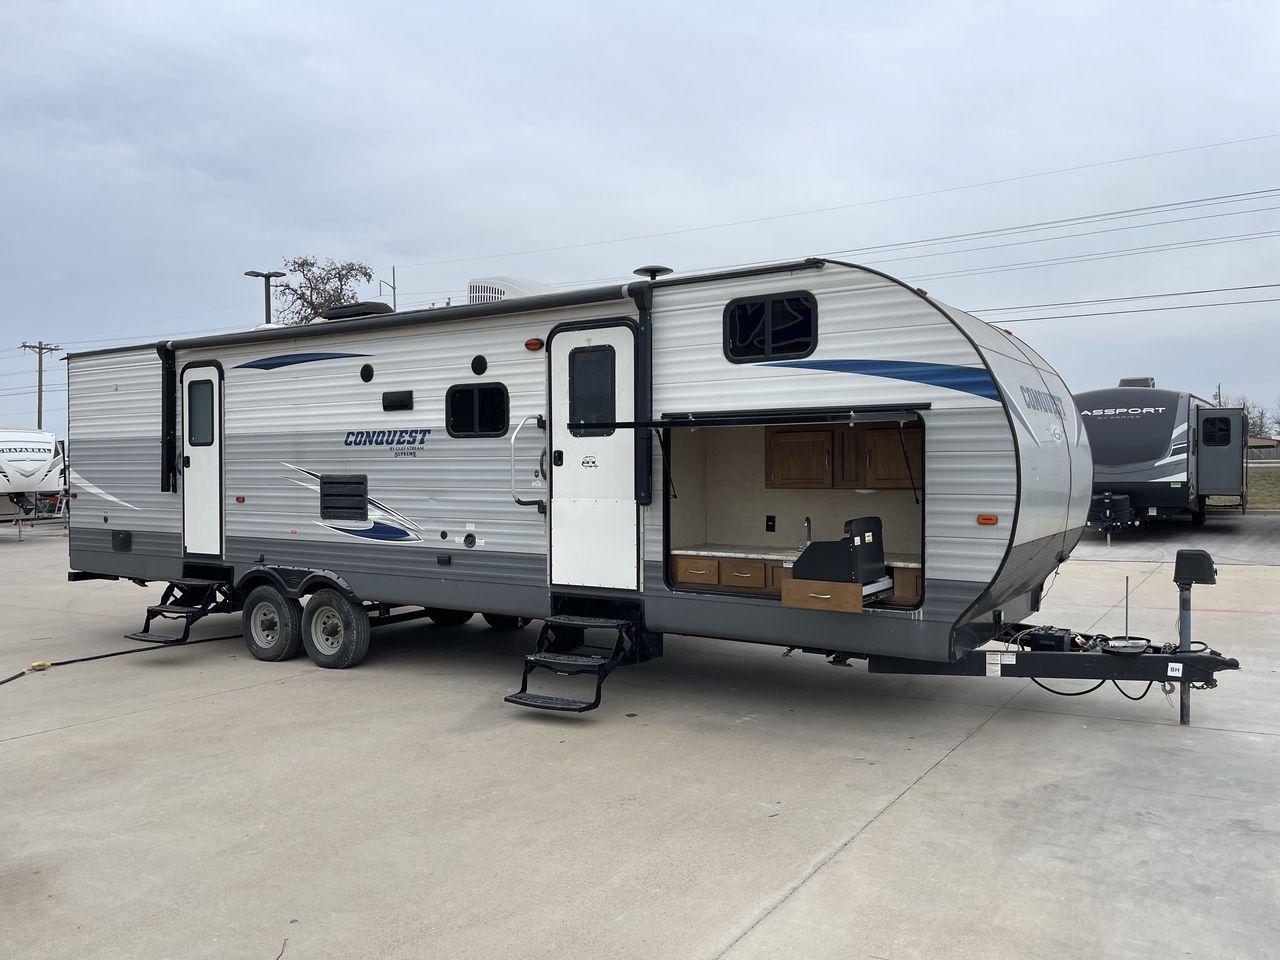 2018 GRAY GULF STREAM CONQUEST 30FRK - (1NL1G362XJ1) , Length: 35.67 ft. | Dry Weight: 7,898 lbs. | Slides: 2 transmission, located at 4319 N Main Street, Cleburne, TX, 76033, (817) 221-0660, 32.435829, -97.384178 - With the 2018 Gulf Stream Conquest 30FRK travel trailer, you'll have the ultimate comfort and convenience. Weighing in at 7,898 pounds dry, this well-designed trailer is 35.67 feet long, giving you plenty of room for your travels. The Conquest 30FRK is designed with two slides, one in the living are - Photo #11